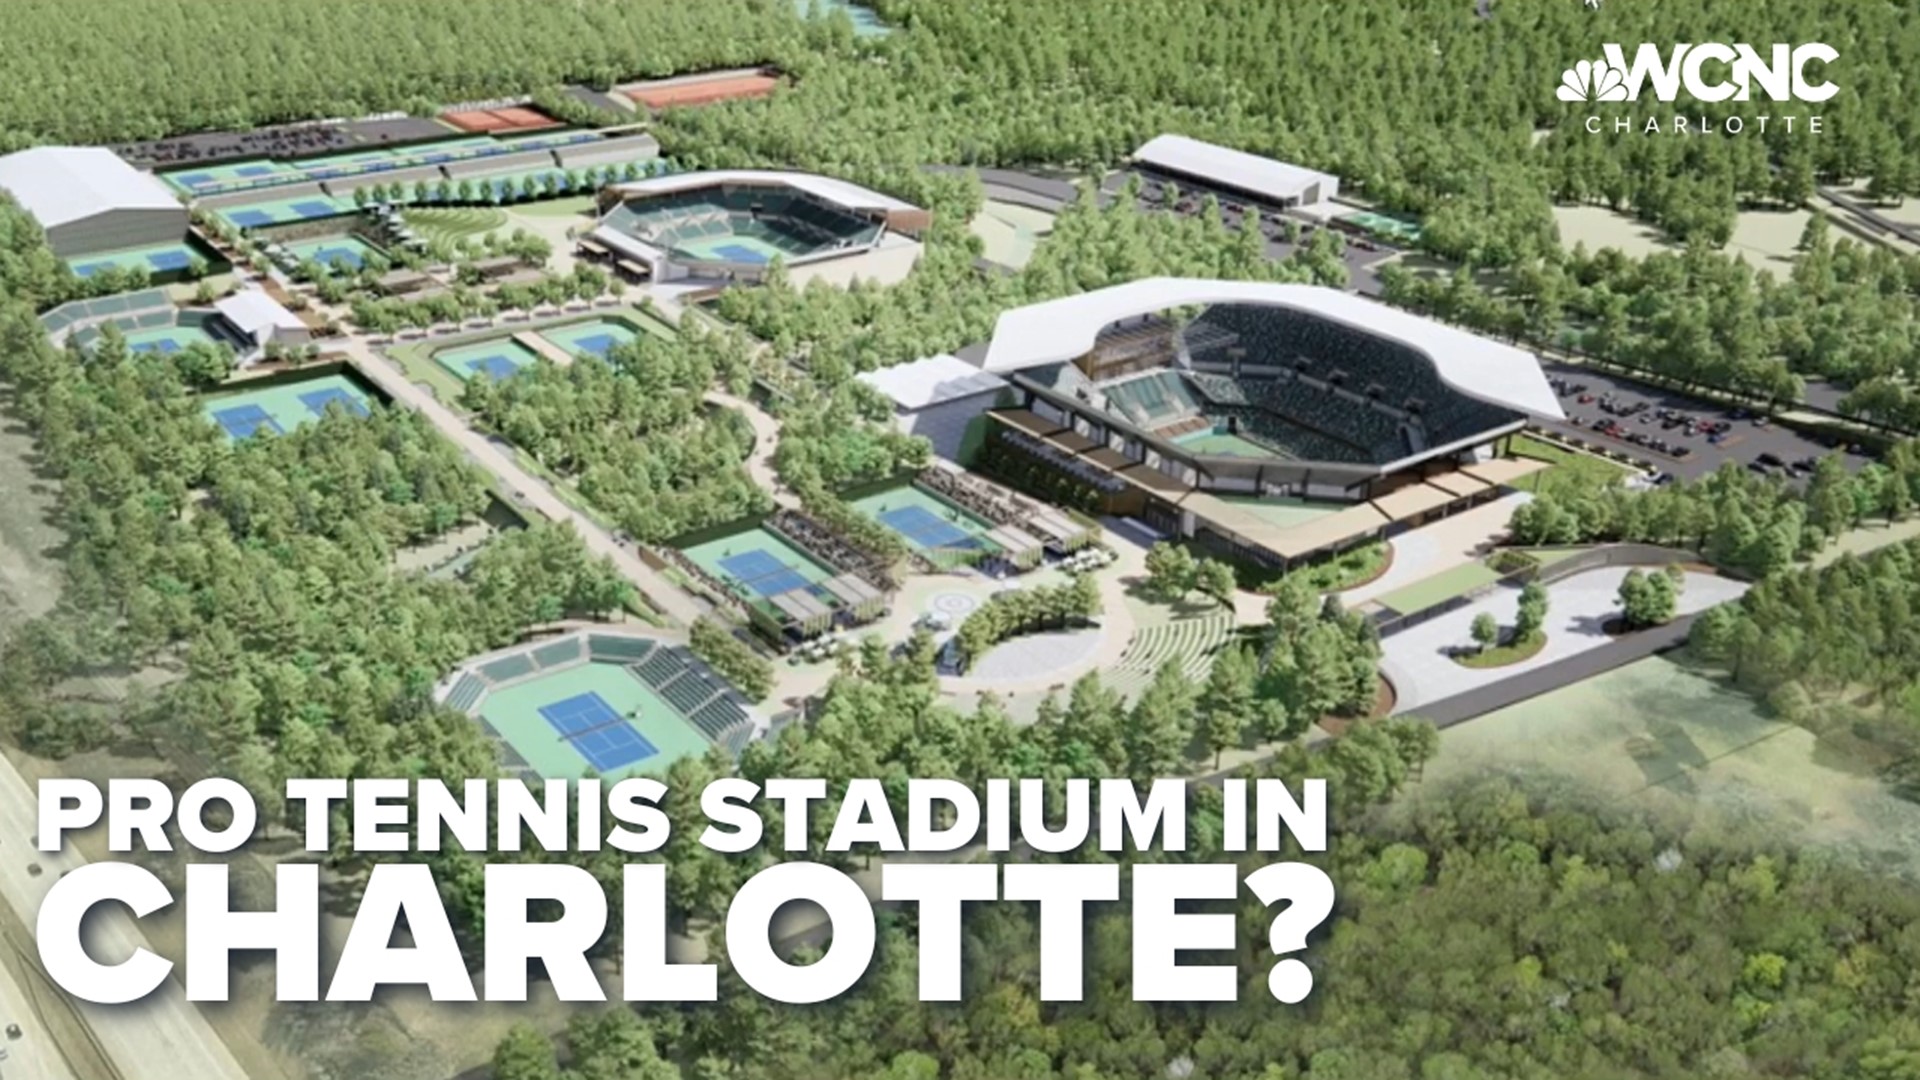 Beemok Capital, the firm owned by Charleston businessman Ben Navarro, wants to build a major tennis facility in Charlotte that would open by 2026.